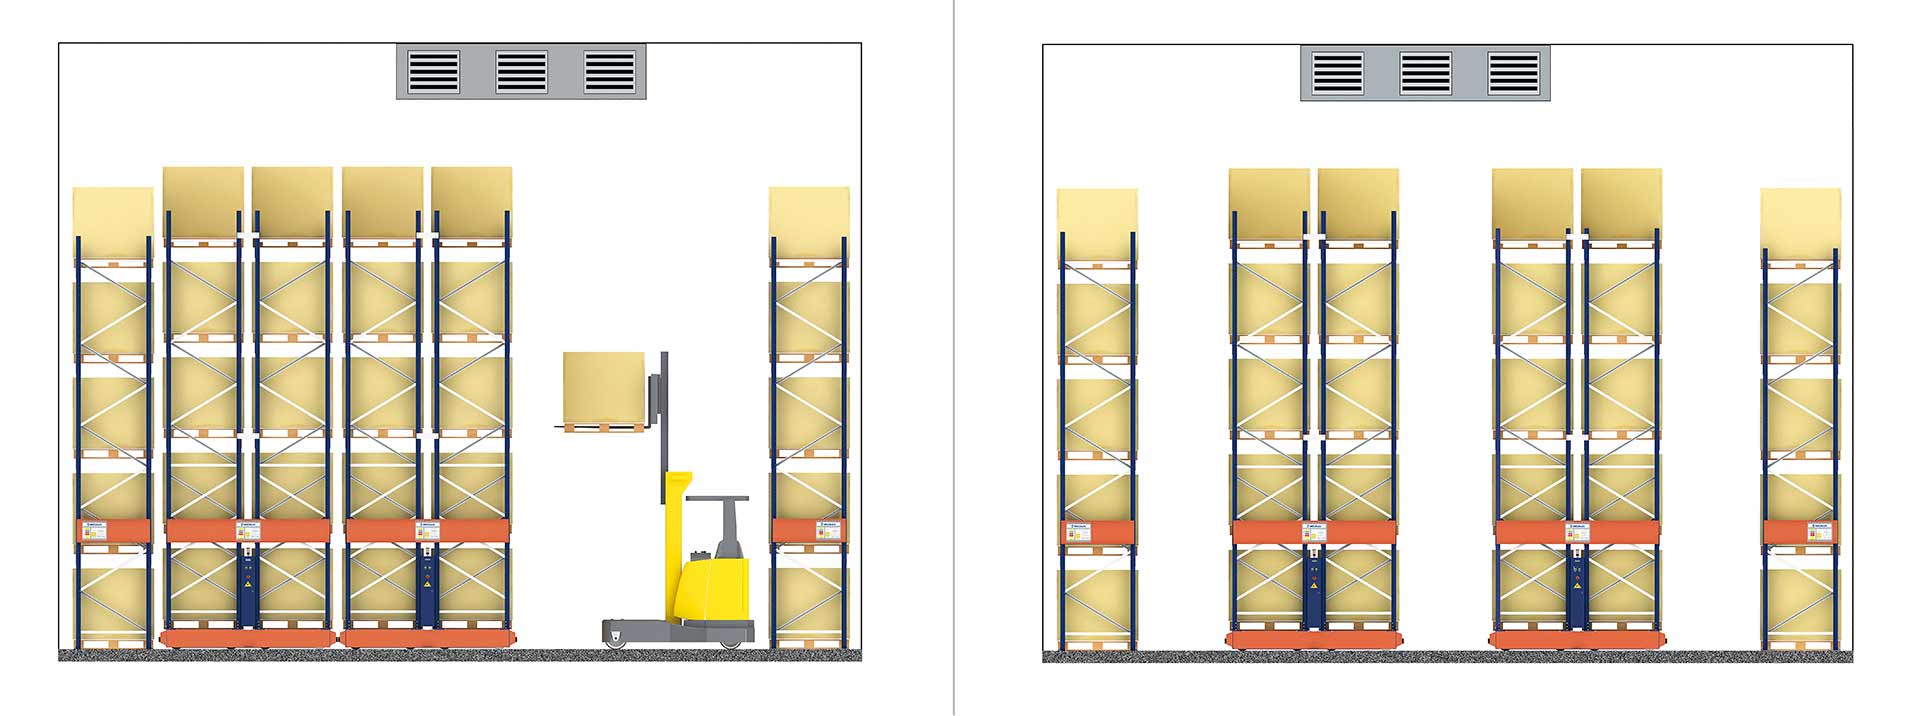 The parking option enables increased separation between racking to guarantee better air circulation